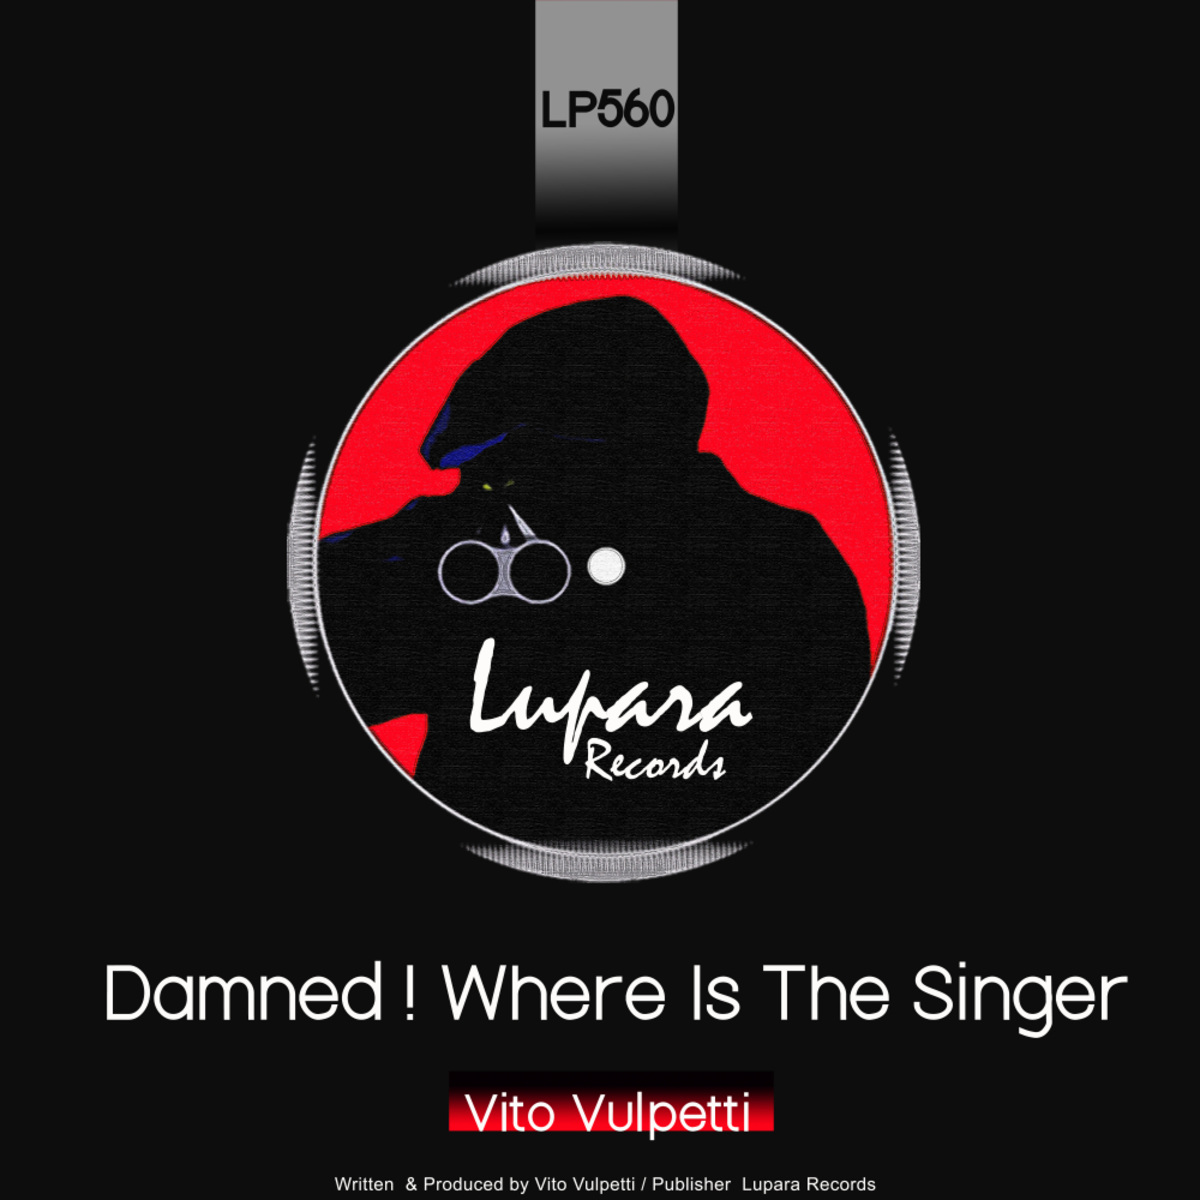 Vito Vulpetti - Damned ! Where Is The Singer / Lupara Records